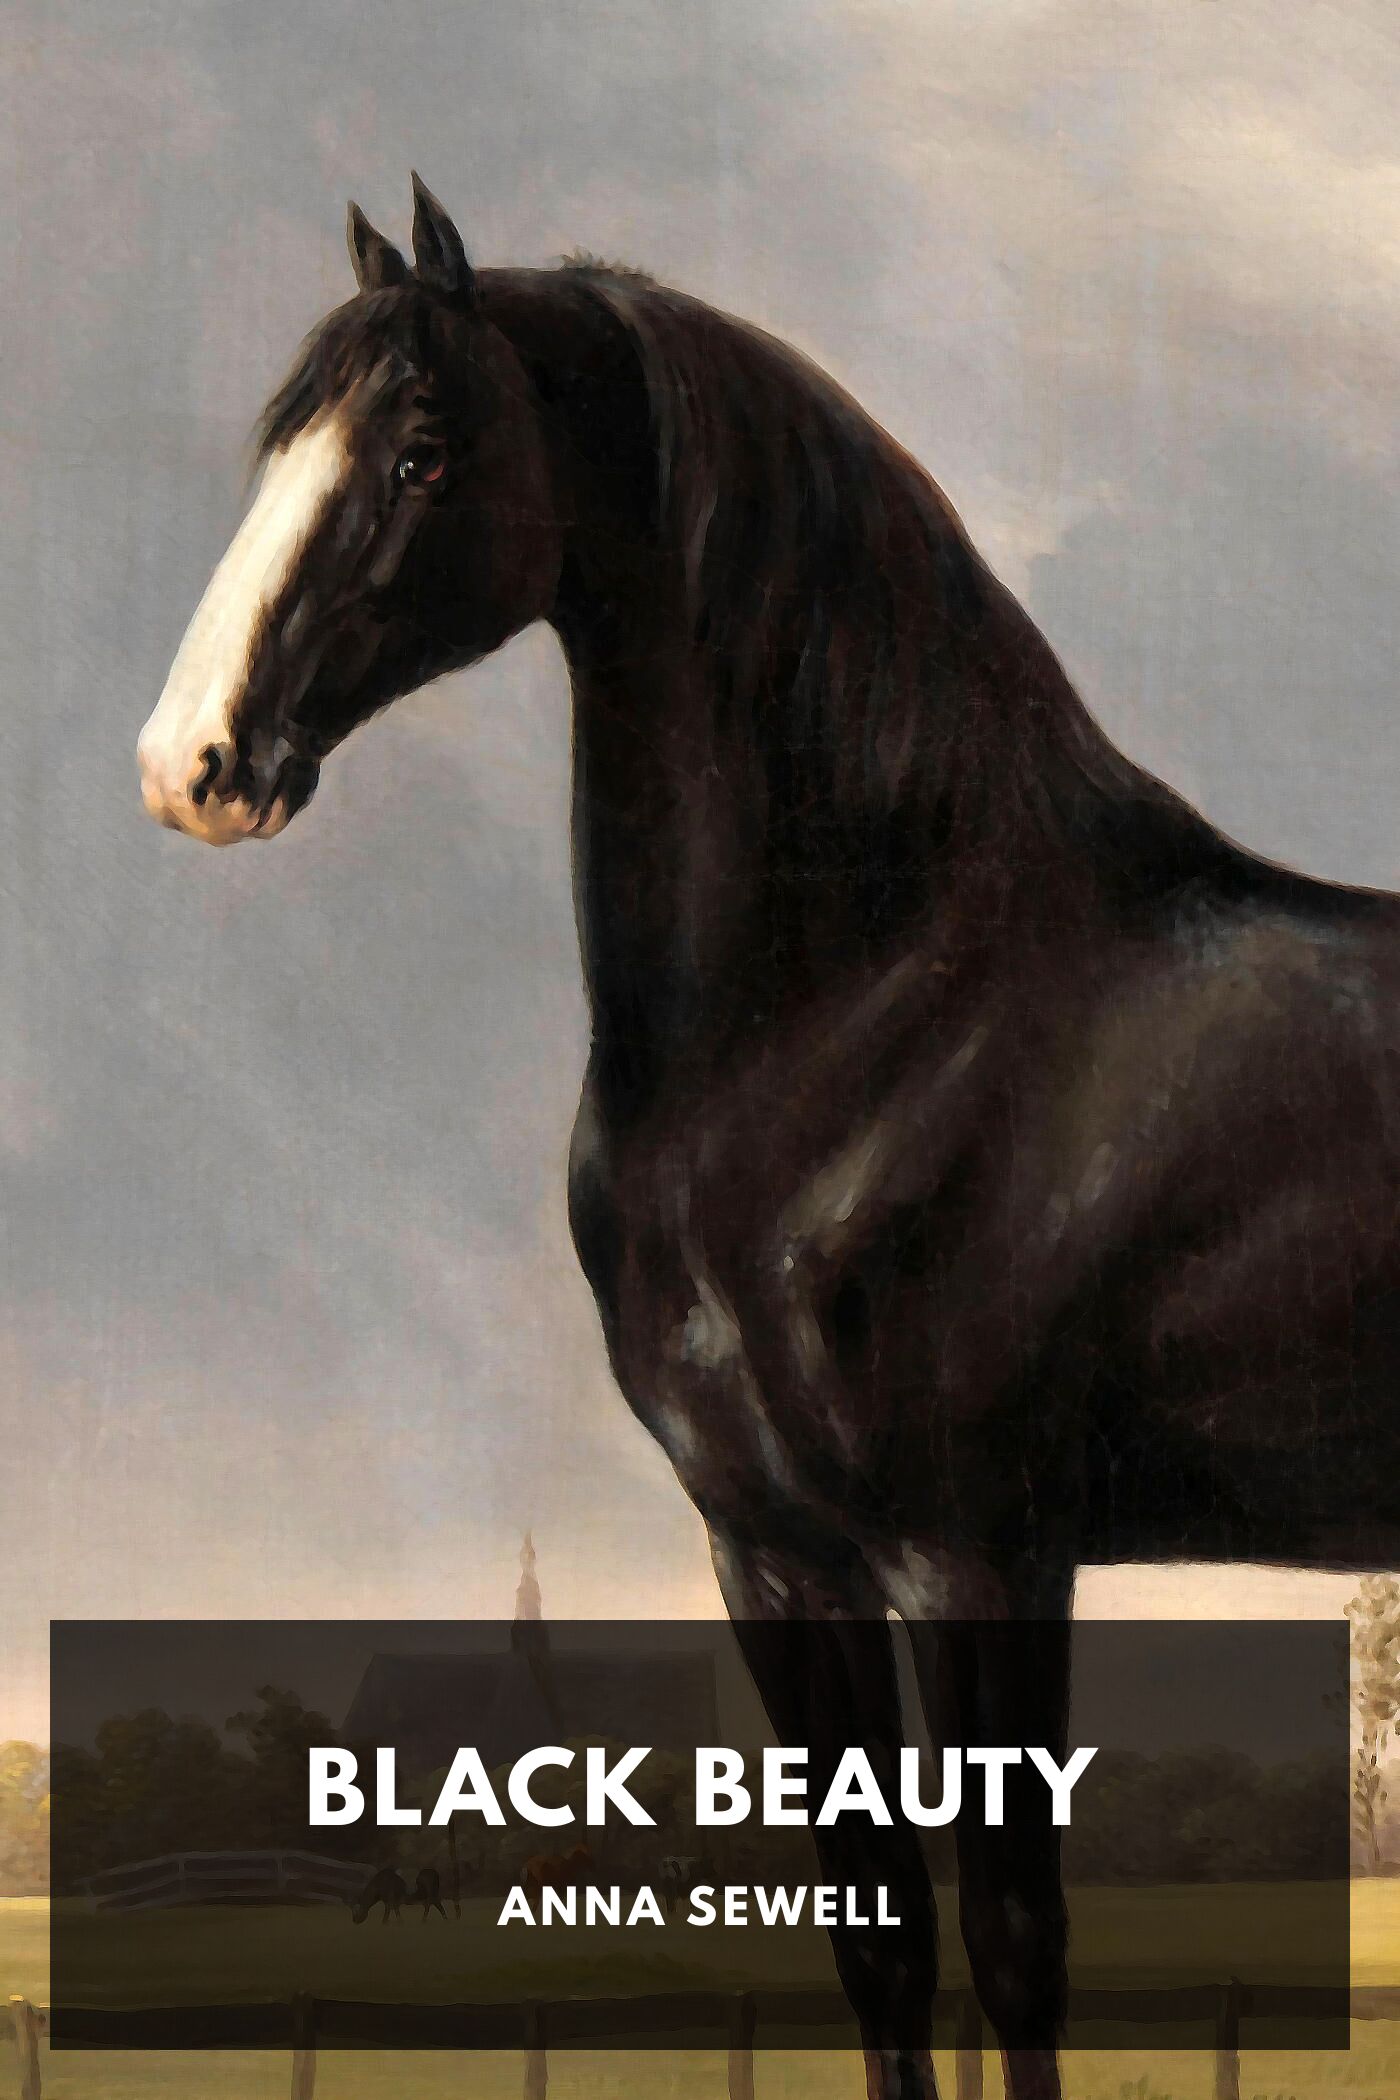 Black Beauty By Anna Sewell Free Ebook Download Standard Ebooks Free And Liberated Ebooks Carefully Produced For The True Book Lover